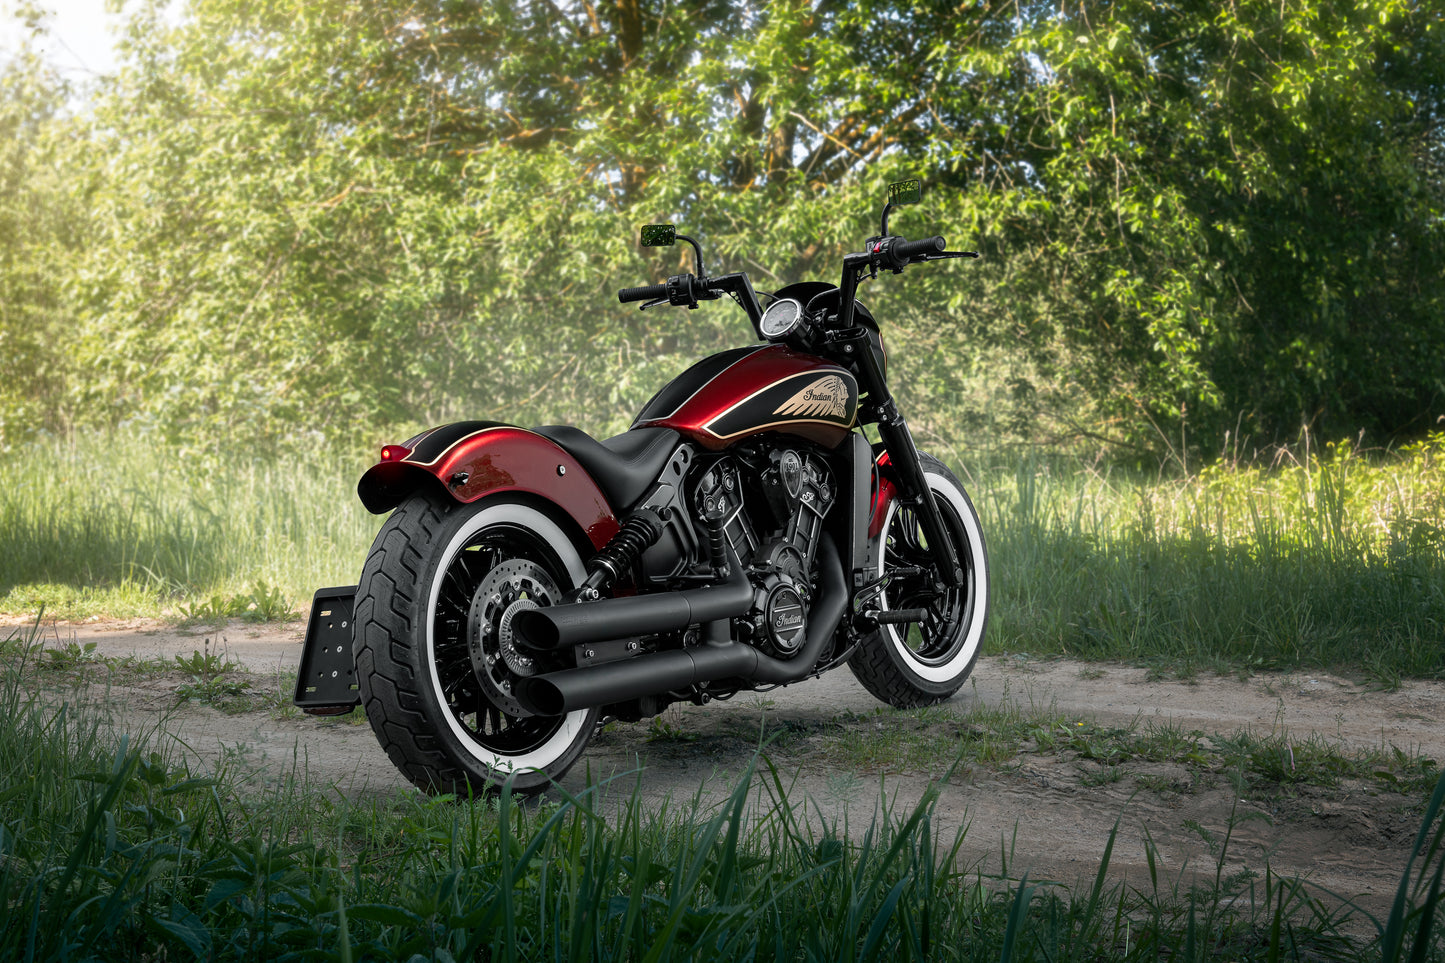 Harley Davidson motorcycle with Killer Custom "Apache" rear fender from the side on the forest ruts